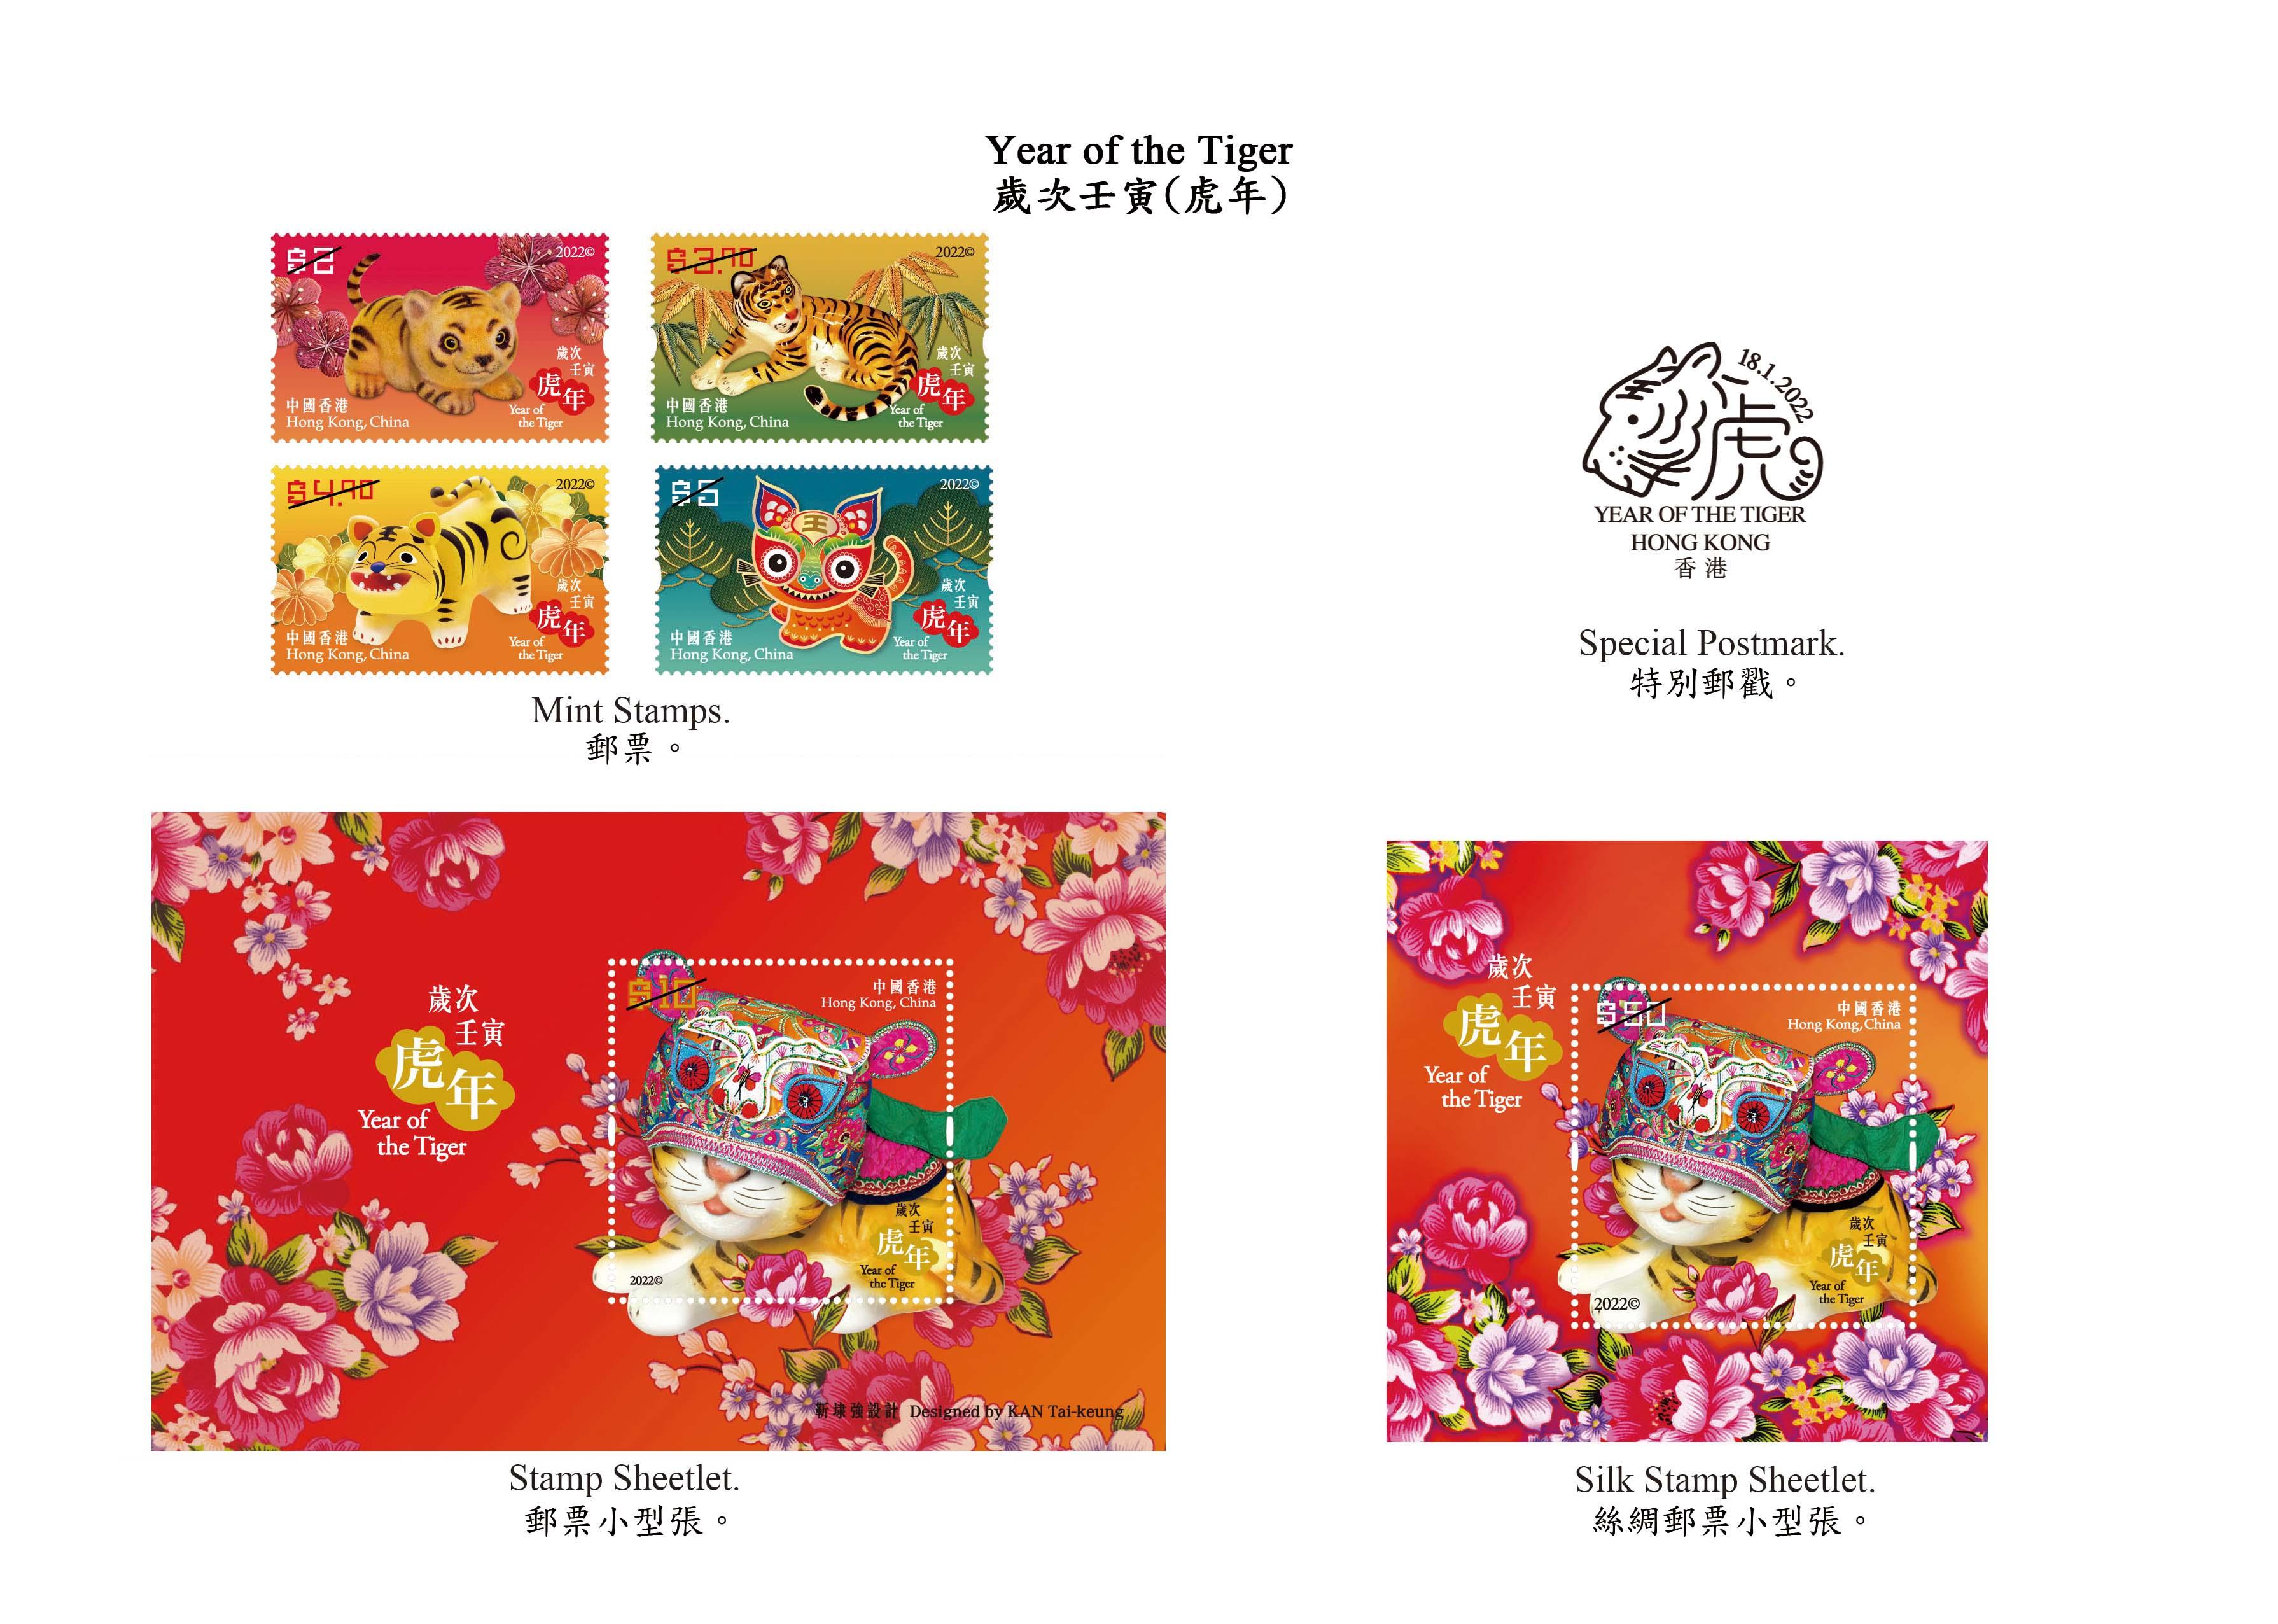 Hongkong Post will launch a special stamp issue and associated philatelic products with the theme "Year of the Tiger" on January 18 (Tuesday). Photo shows the mint stamps, stamp sheetlets and the special postmark.
